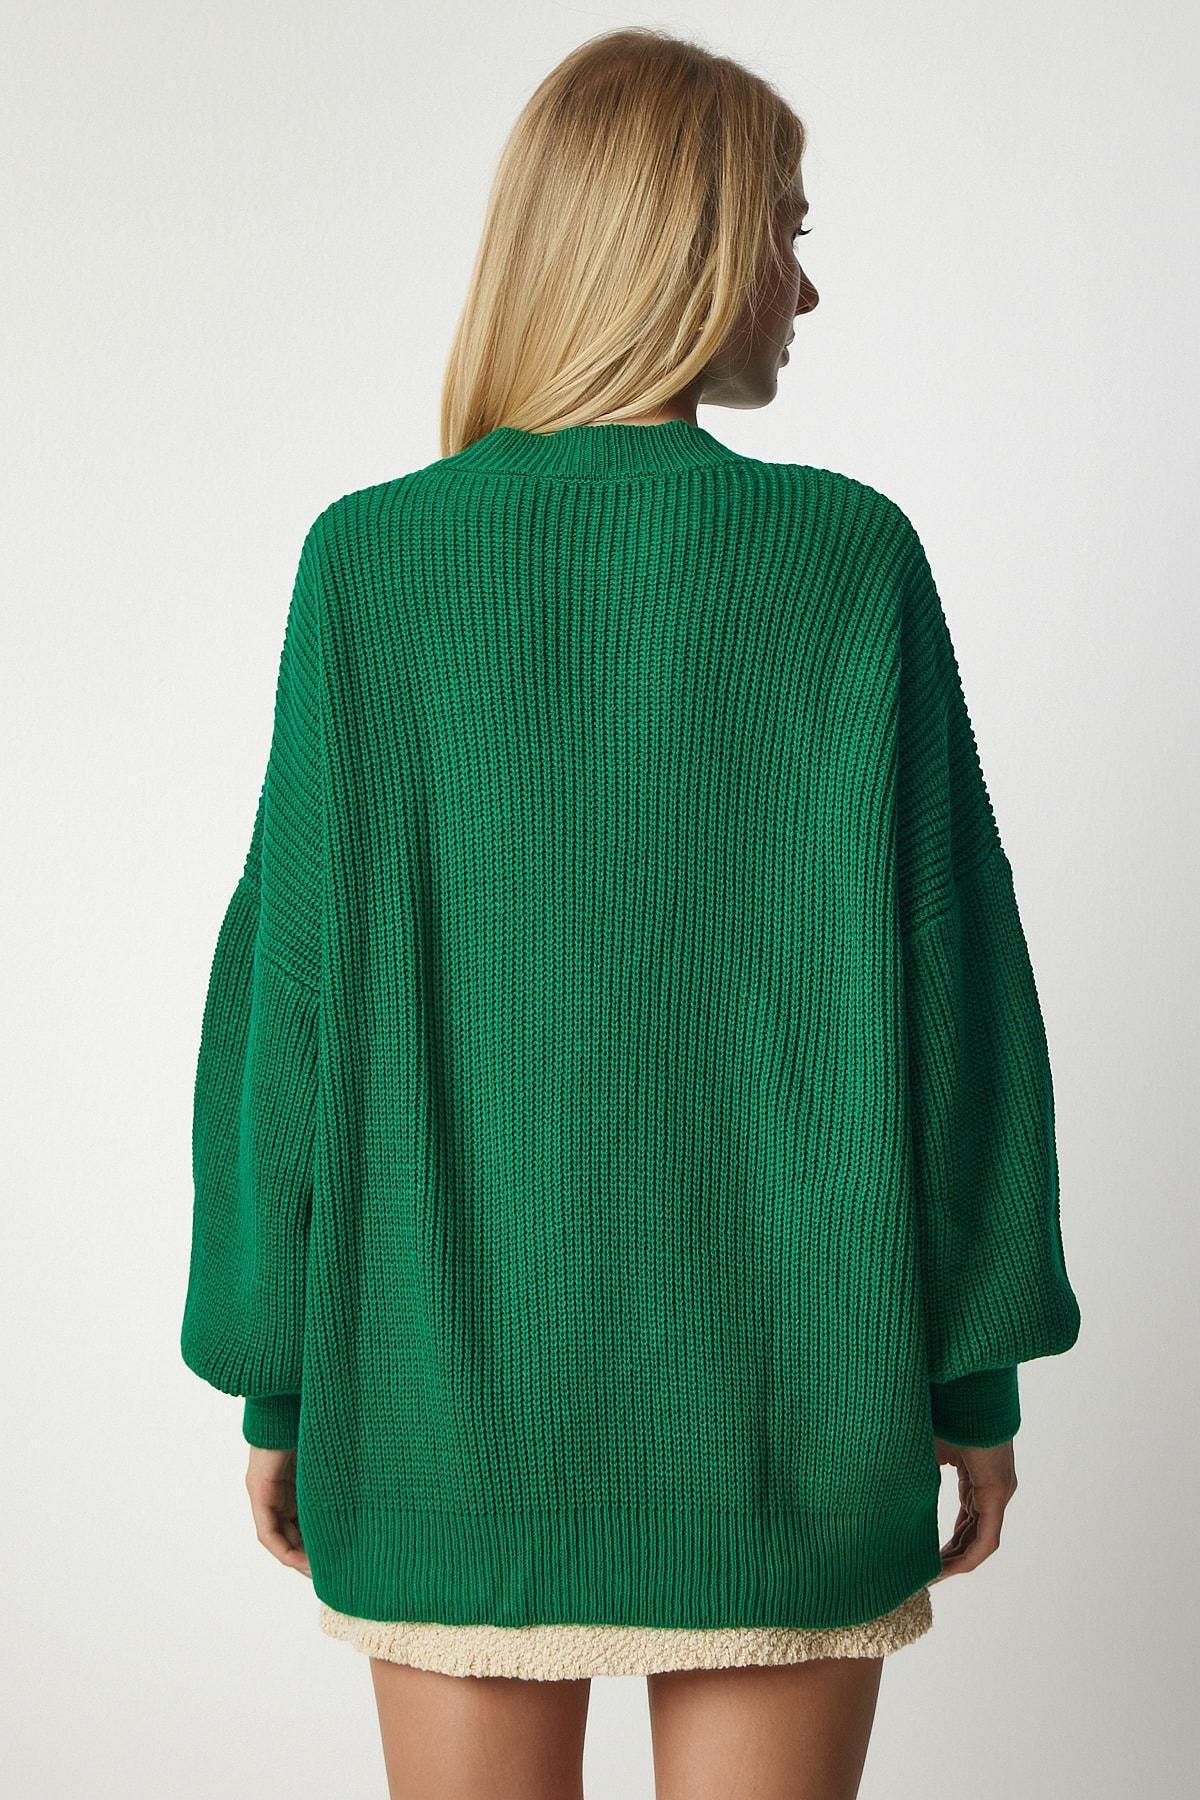 Happiness Istanbul - Green Oversized Knitwear Sweater